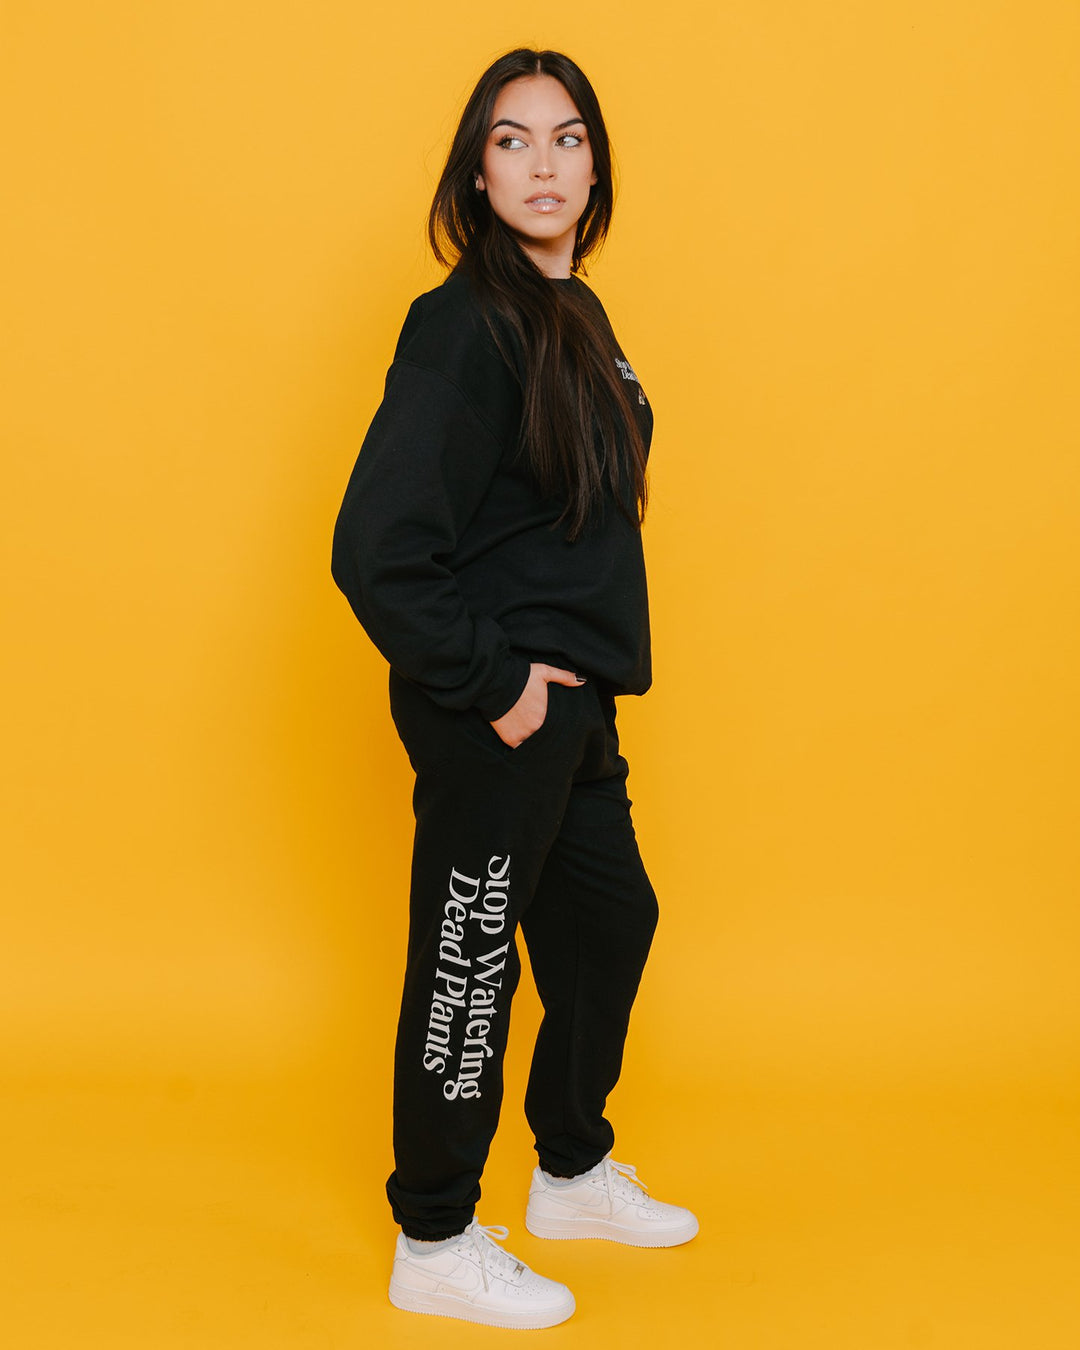 Stop Watering Dead Plants Sweatpants V2 - trainofthoughtcollective